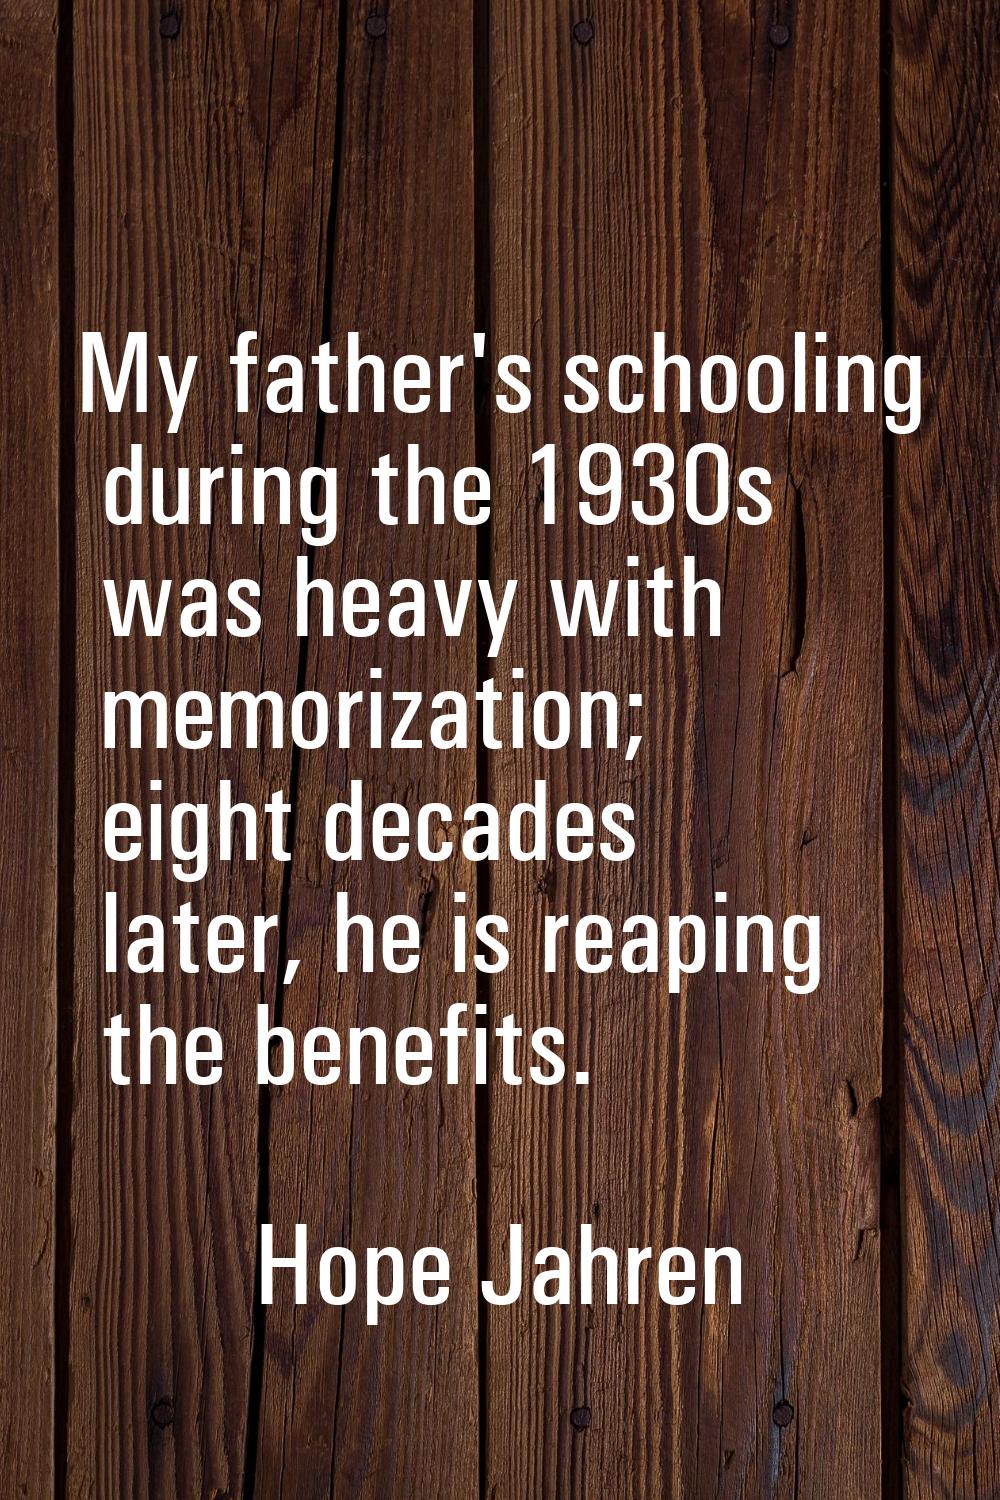 My father's schooling during the 1930s was heavy with memorization; eight decades later, he is reap